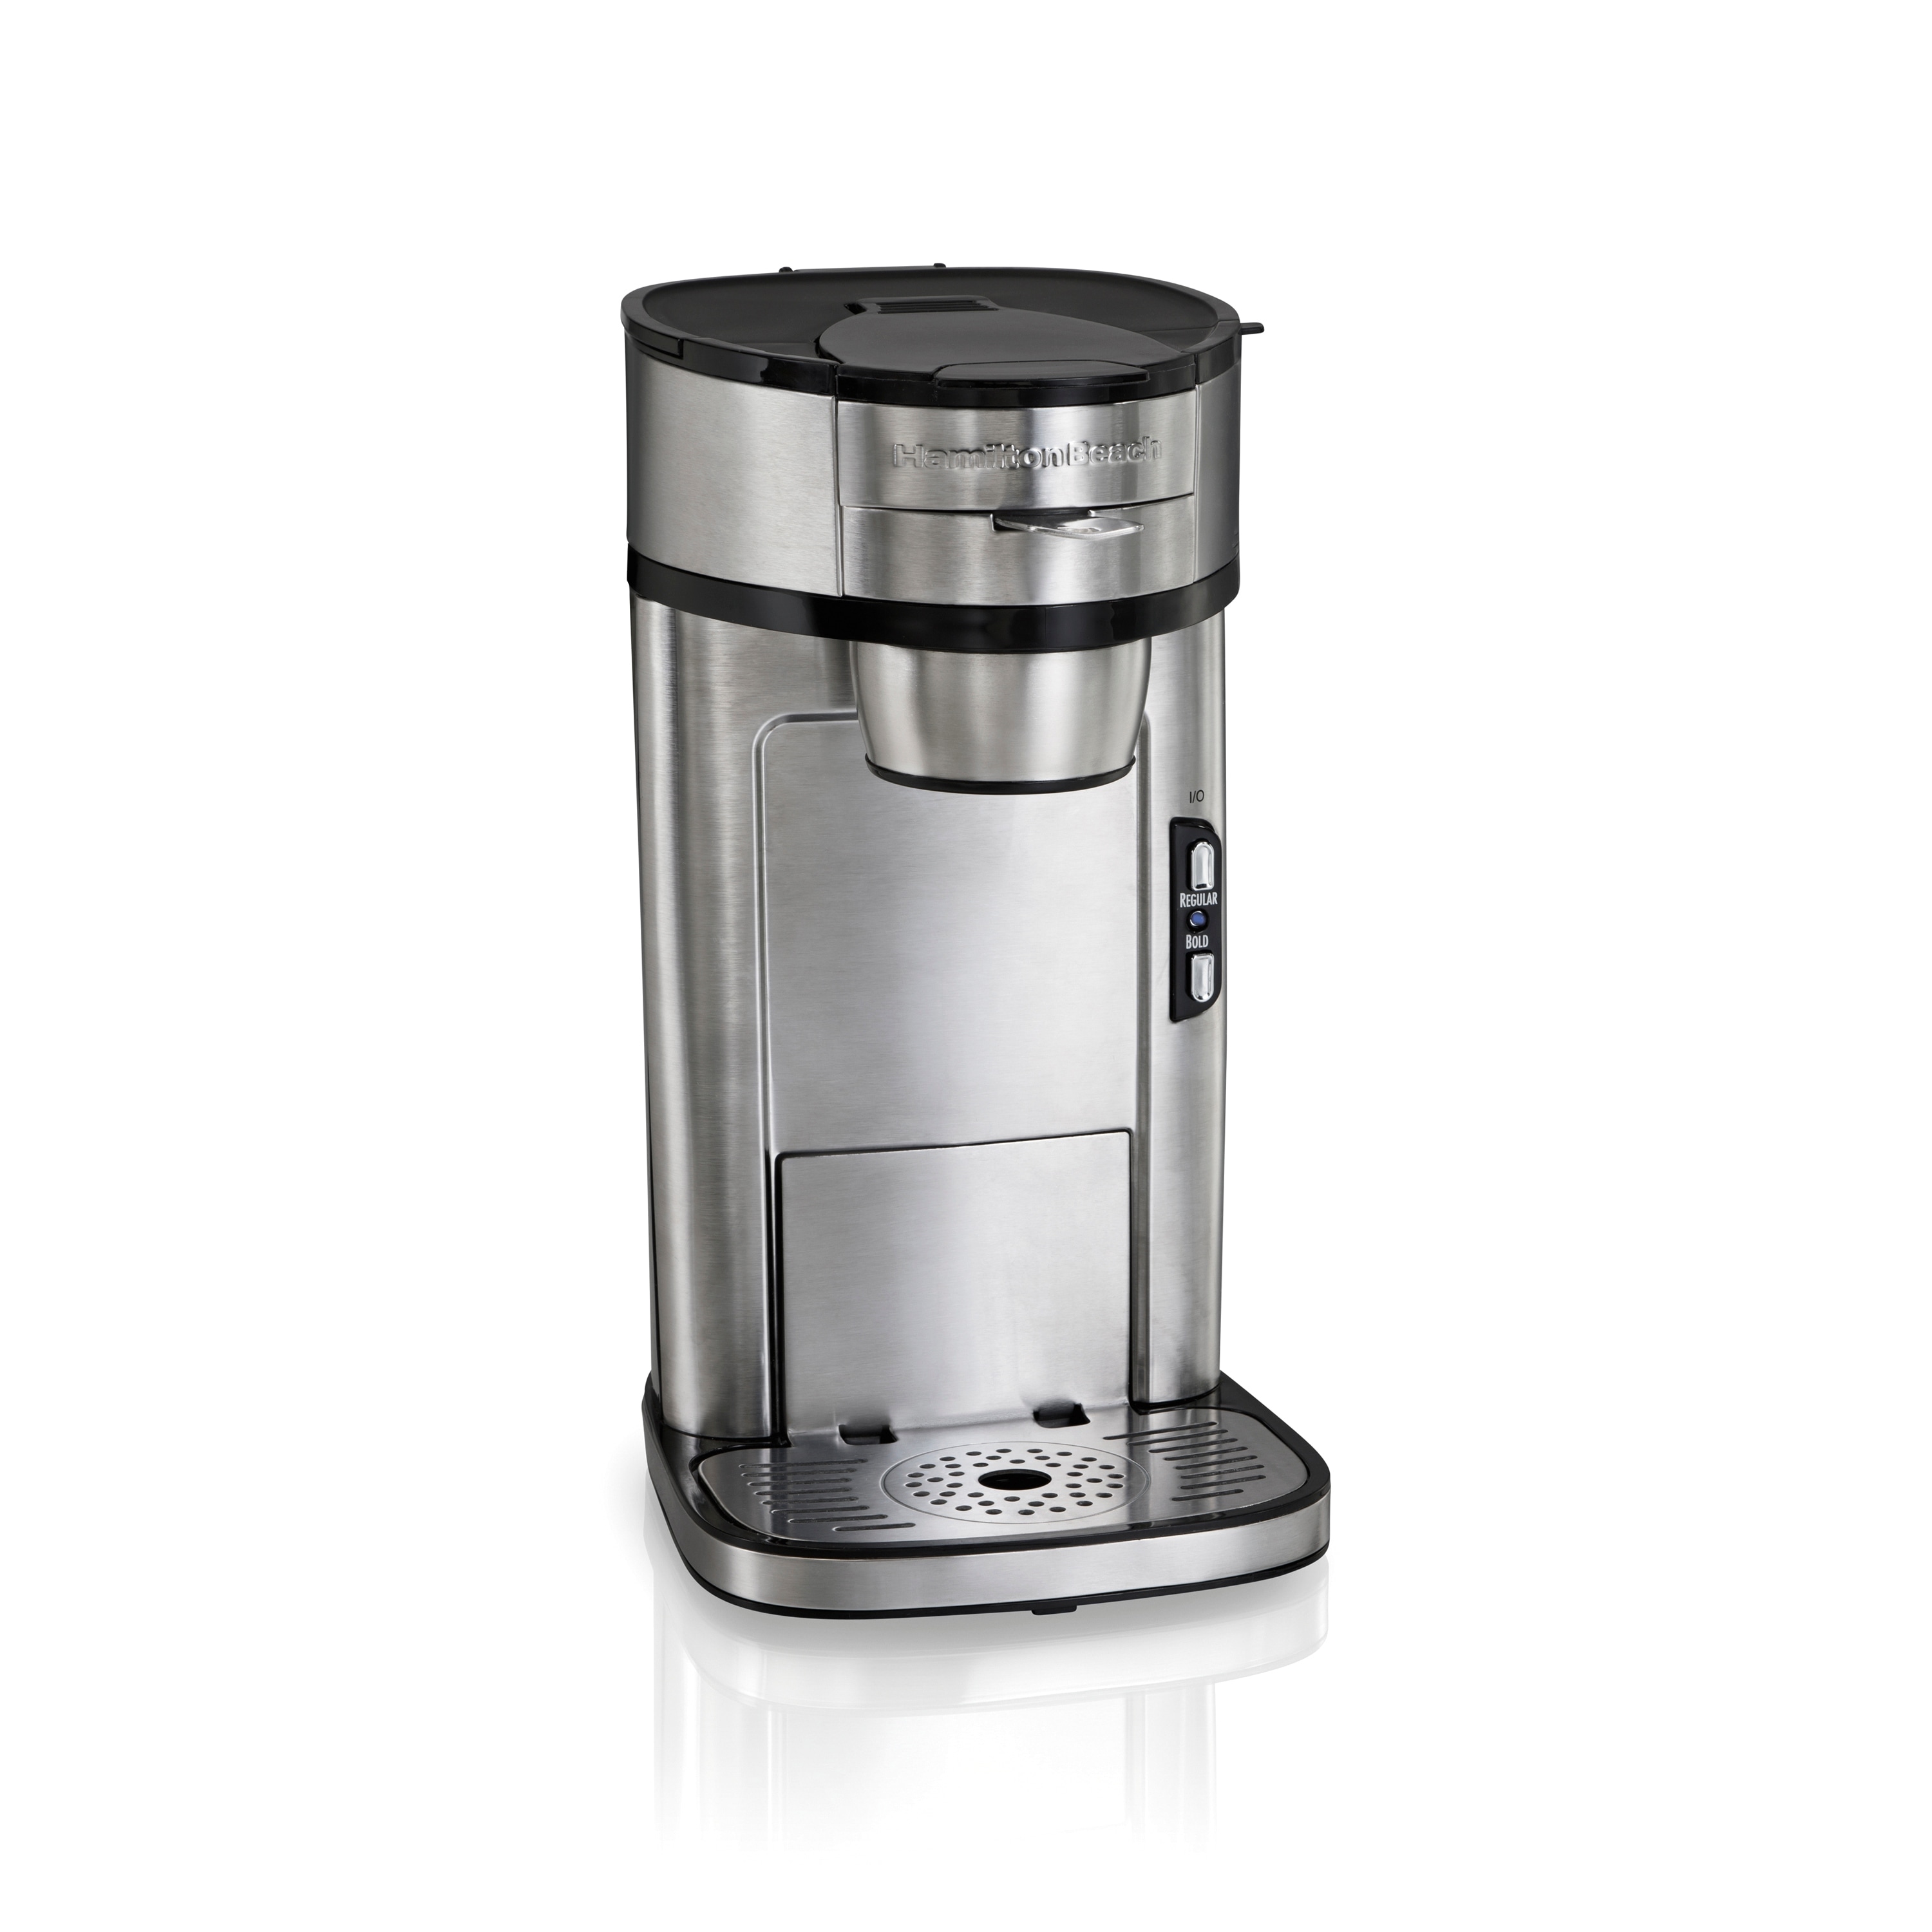 Hamilton Beach The Scoop Single Serve Coffee Maker & Fast Grounds Brewer,  Brews in Minutes, 8-14oz. Cups, Stainless Steel